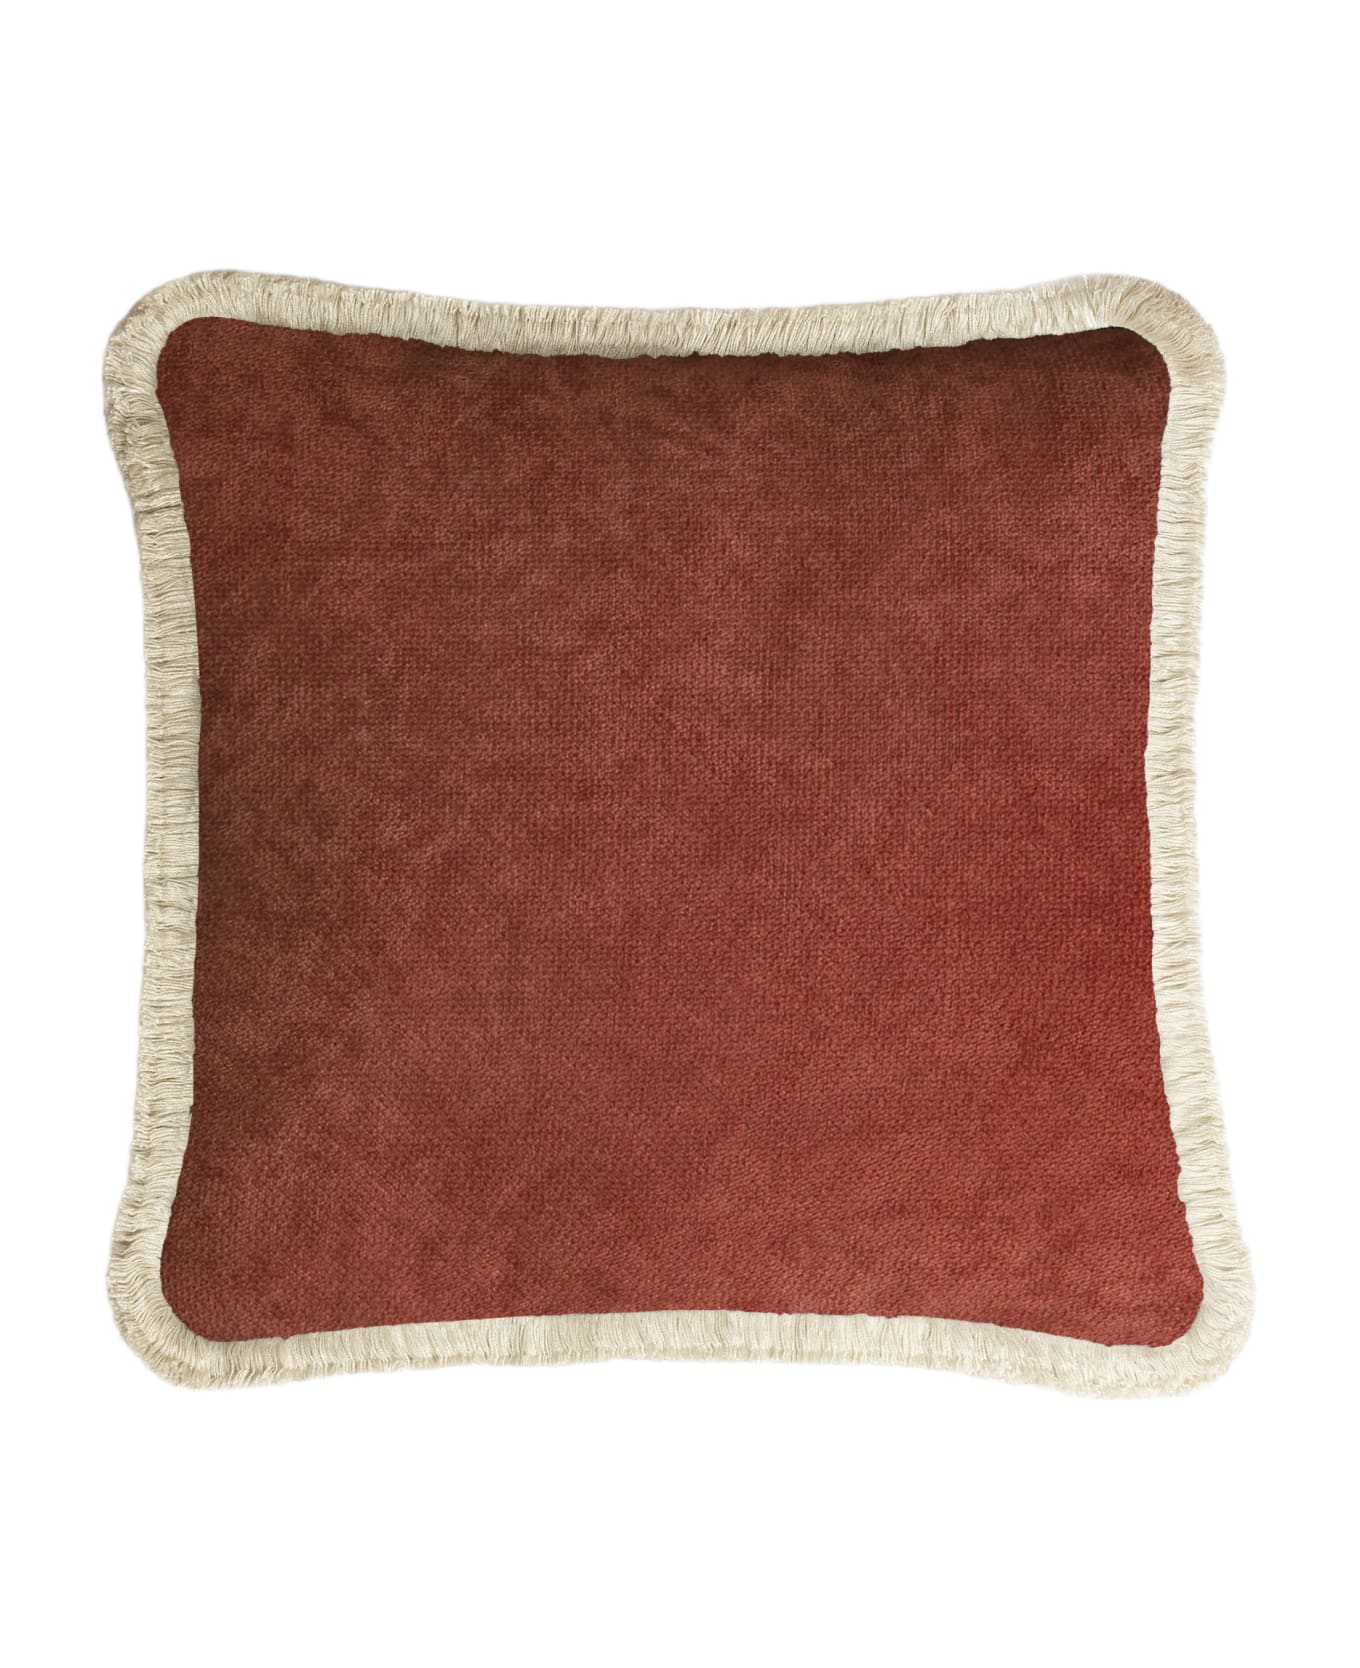 Lo Decor Happy Pillow   Brick Red Velvet With Dirty White  Fringes - Brick Red / Dirty White クッション